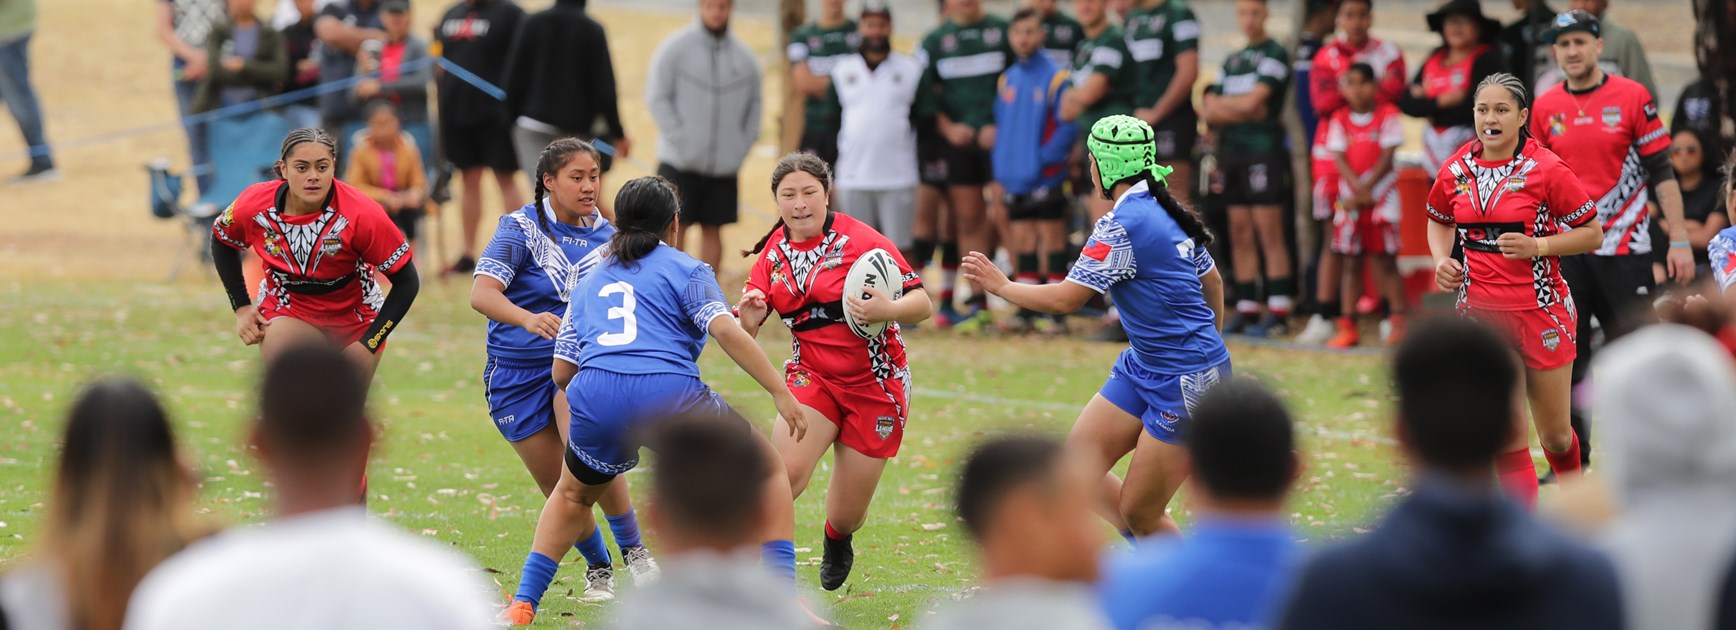 NSWRL Ramps up Competitions and Community Coverage